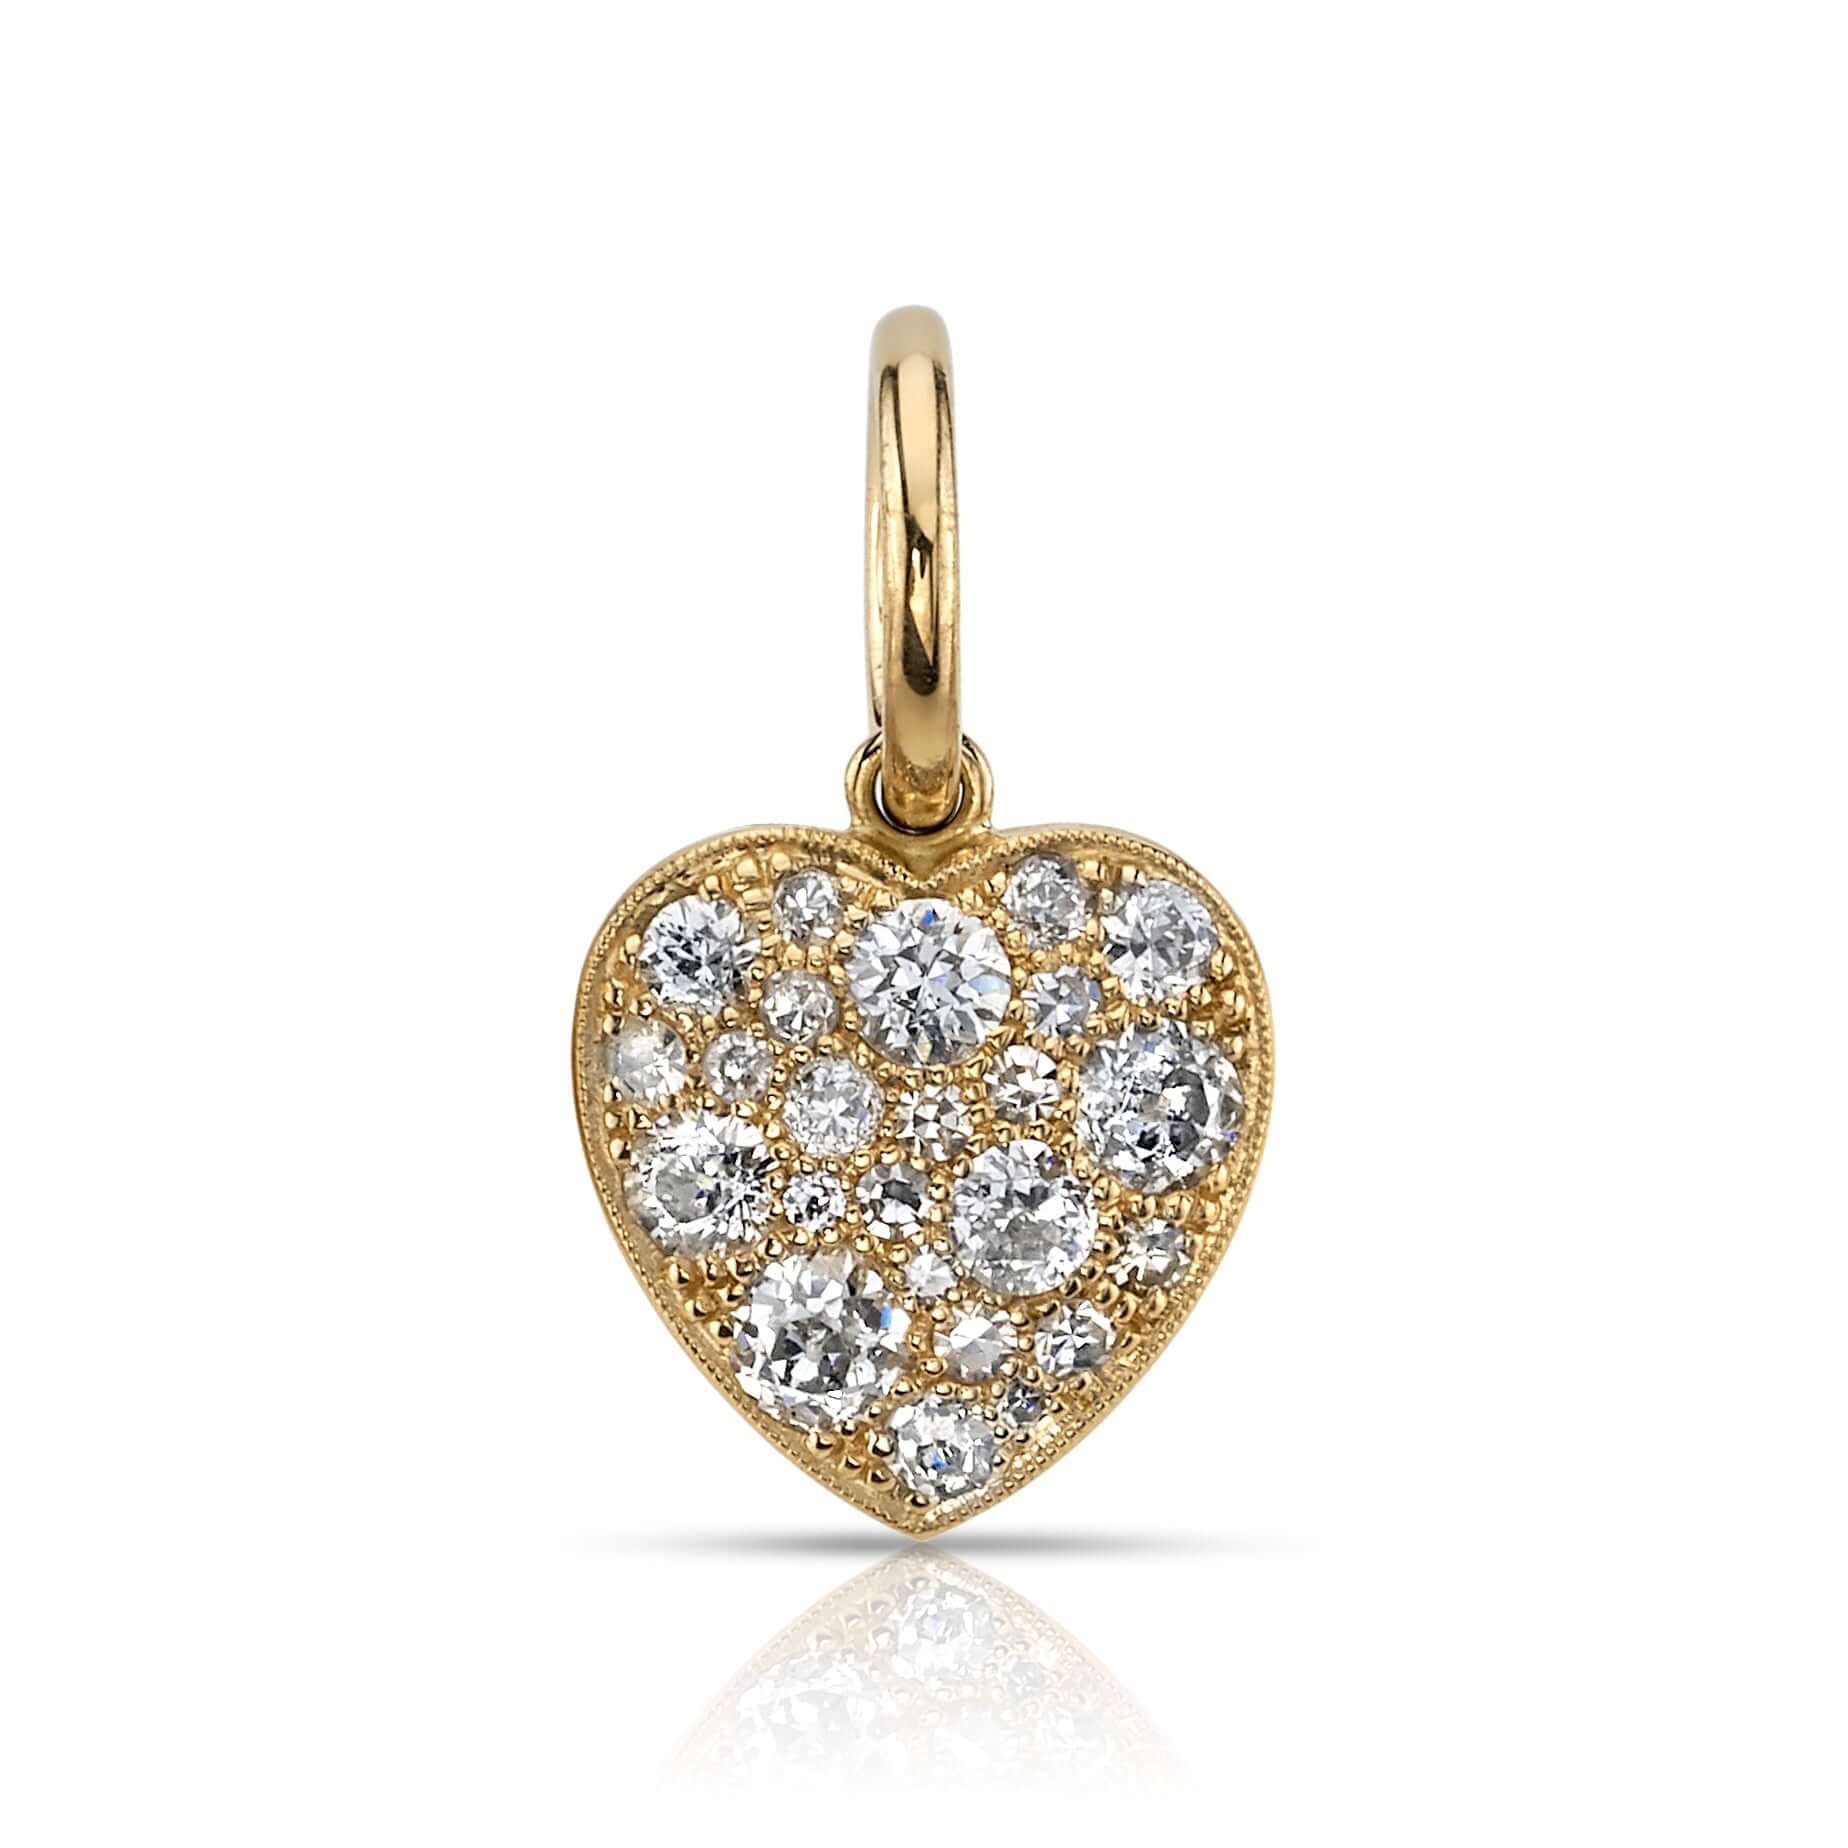 SINGLE STONE SMALL COBBLESTONE HEART PENDANT featuring Approximately 0.80ctw various old cut and round brilliant cut diamonds set in a handcrafted 18K yellow gold heart pendant. Prices vary according to diamond weight. Heart measures 12.5mm x 11.7mm. Pric